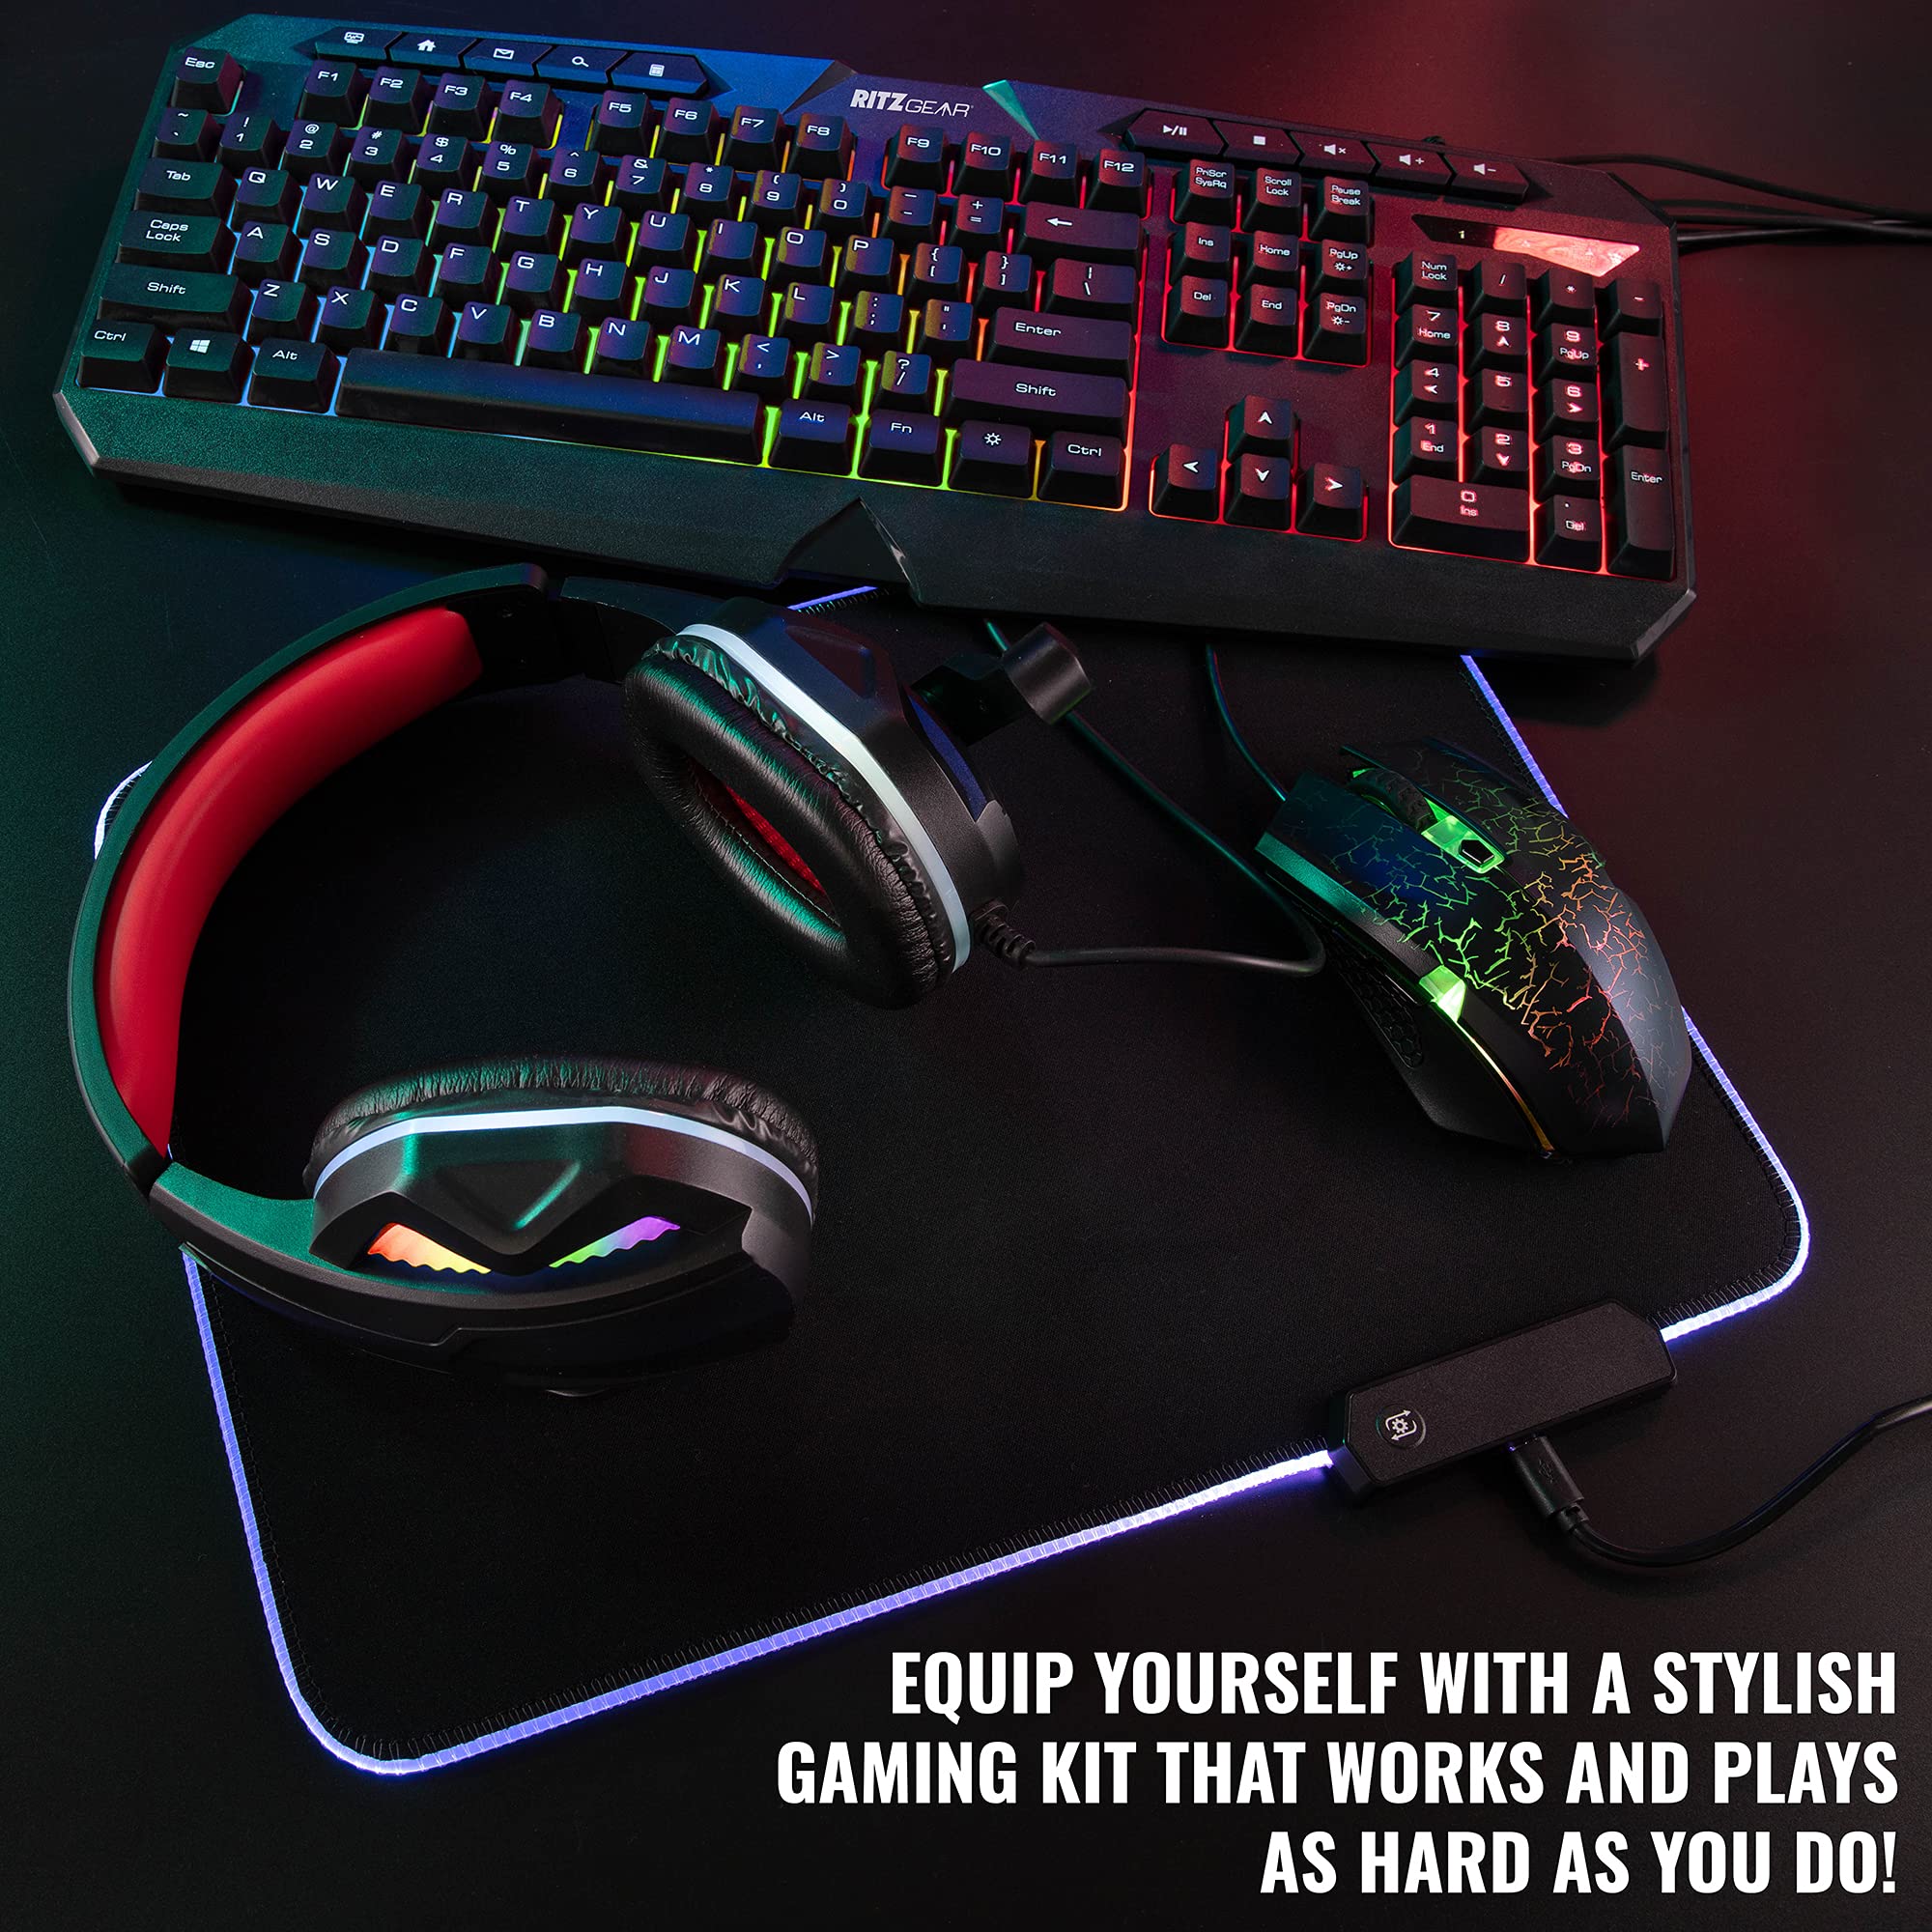 Ritz Gear RGB Gaming Accessories Kit I 4-in-1 LED Combo with Multimedia Keyboard, Optical Mouse, Mouse Pad & Headset with Adapter for Windows 7+ Desktop, Laptop, Xbox & PS4 & CR3-X Bluetooth Monitors